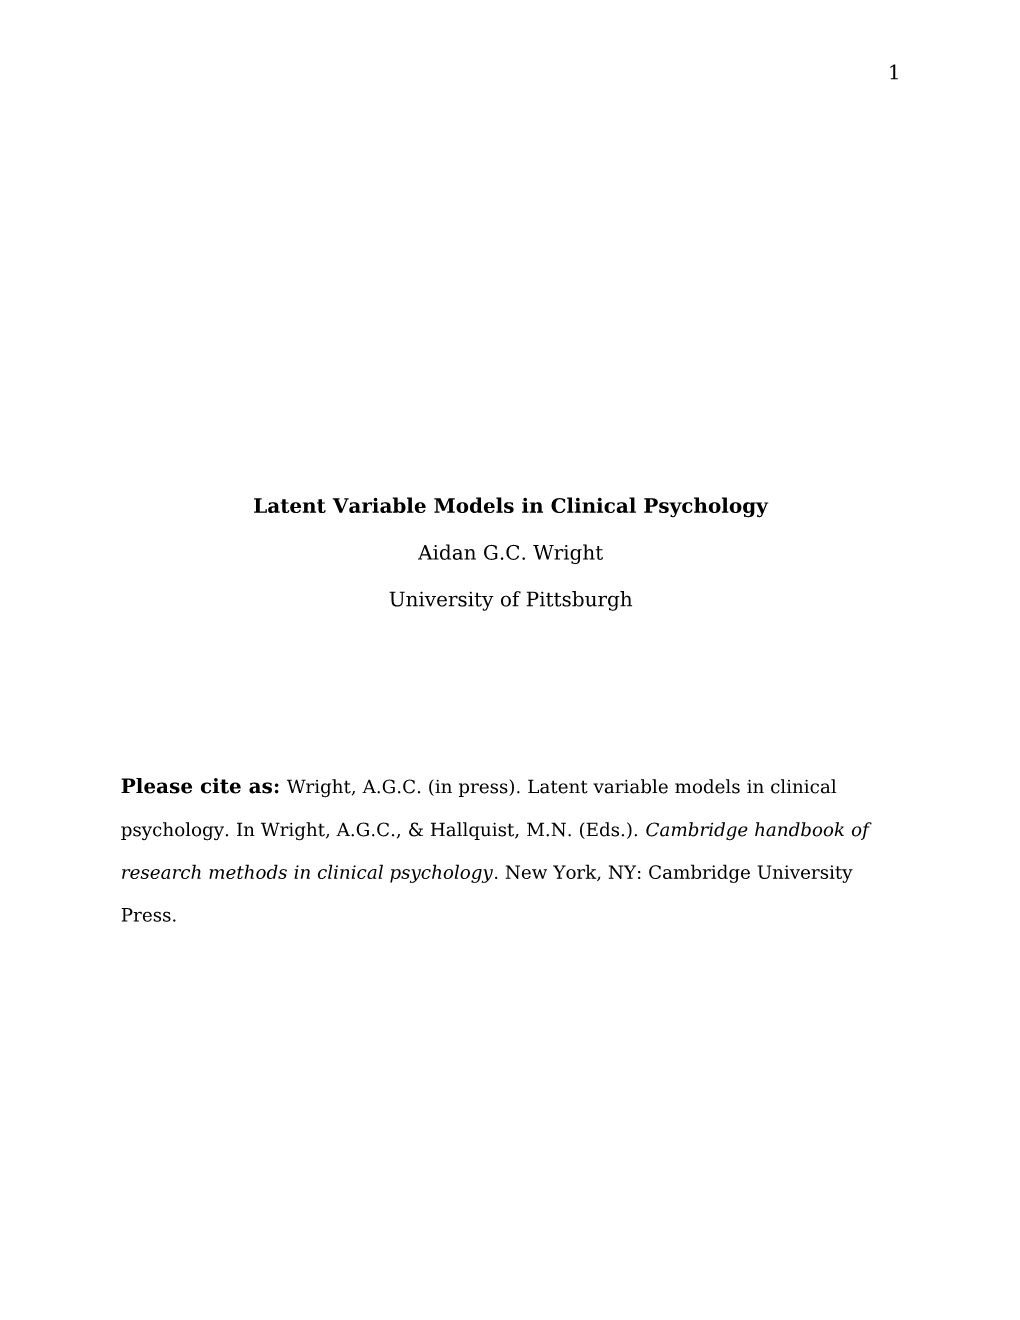 Wright, AGC (In Press). Latent Variable Models in Clinical